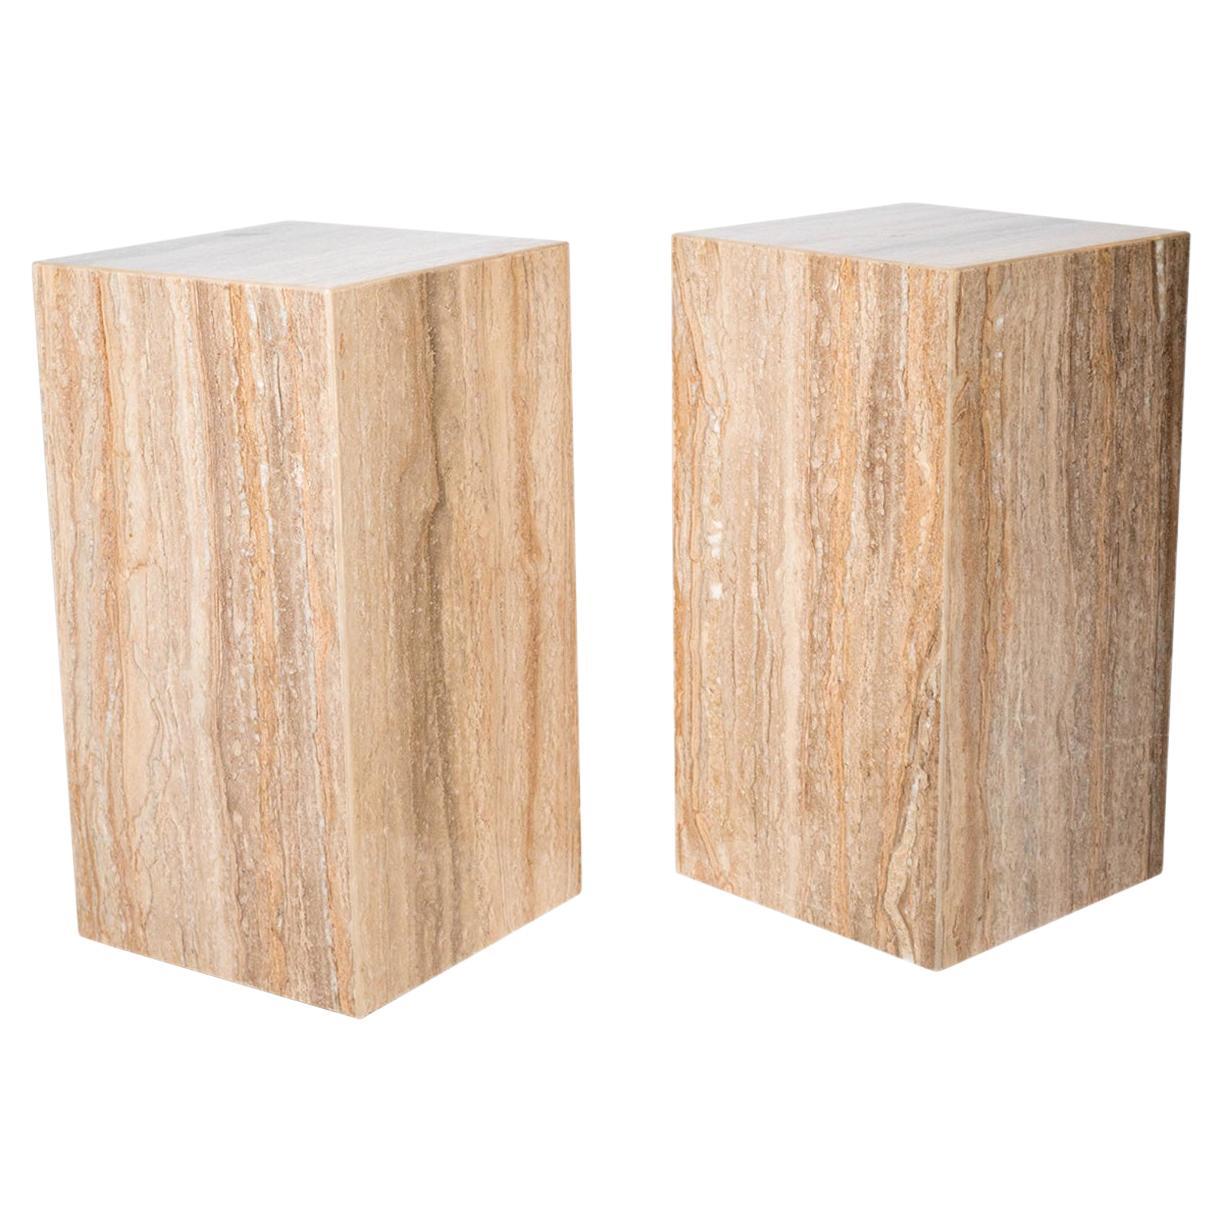 1980 Italian Travertine Polished Tower Cube Side Tables - a Pair